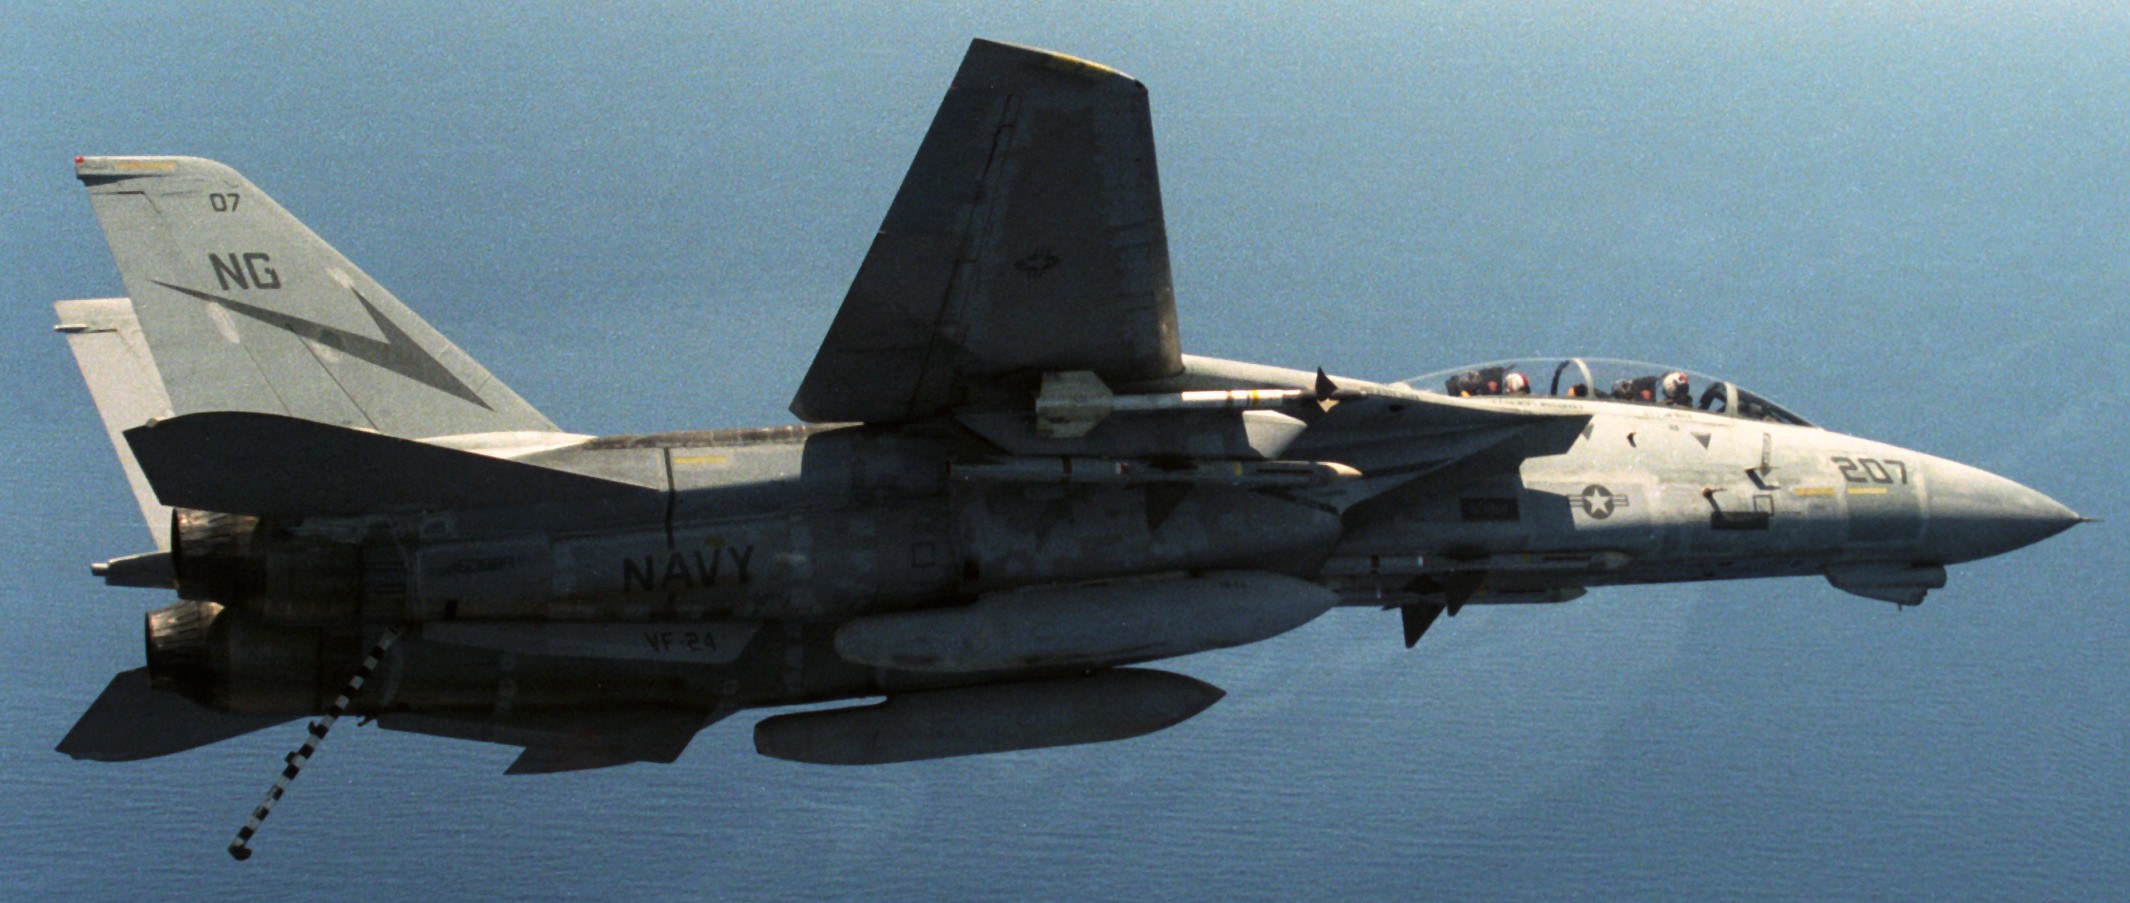 vf-24 fighting renegades fighter squadron navy f-14a tomcat carrier air wing cvw-9 uss kitty hawk cv-63 23